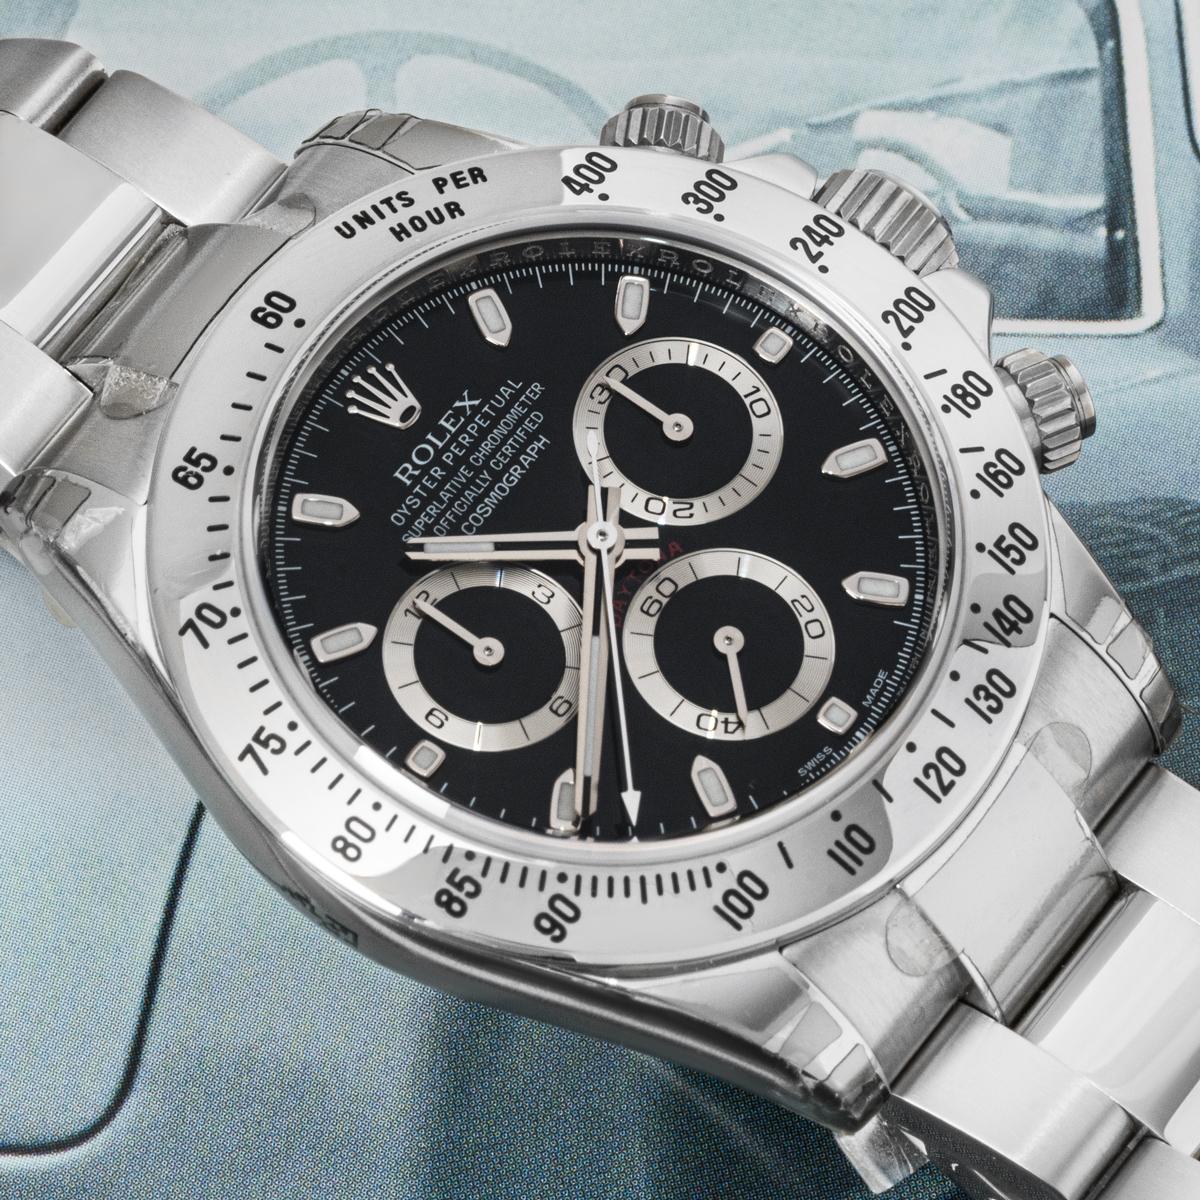 The predecessor to the 116500LN, this stainless steel Cosmograph Daytona by Rolex. Featuring a unique APH error black dial, a tachymetric scale, three chronograph counters and pushers; the Daytona was designed to be the ultimate timing tool for